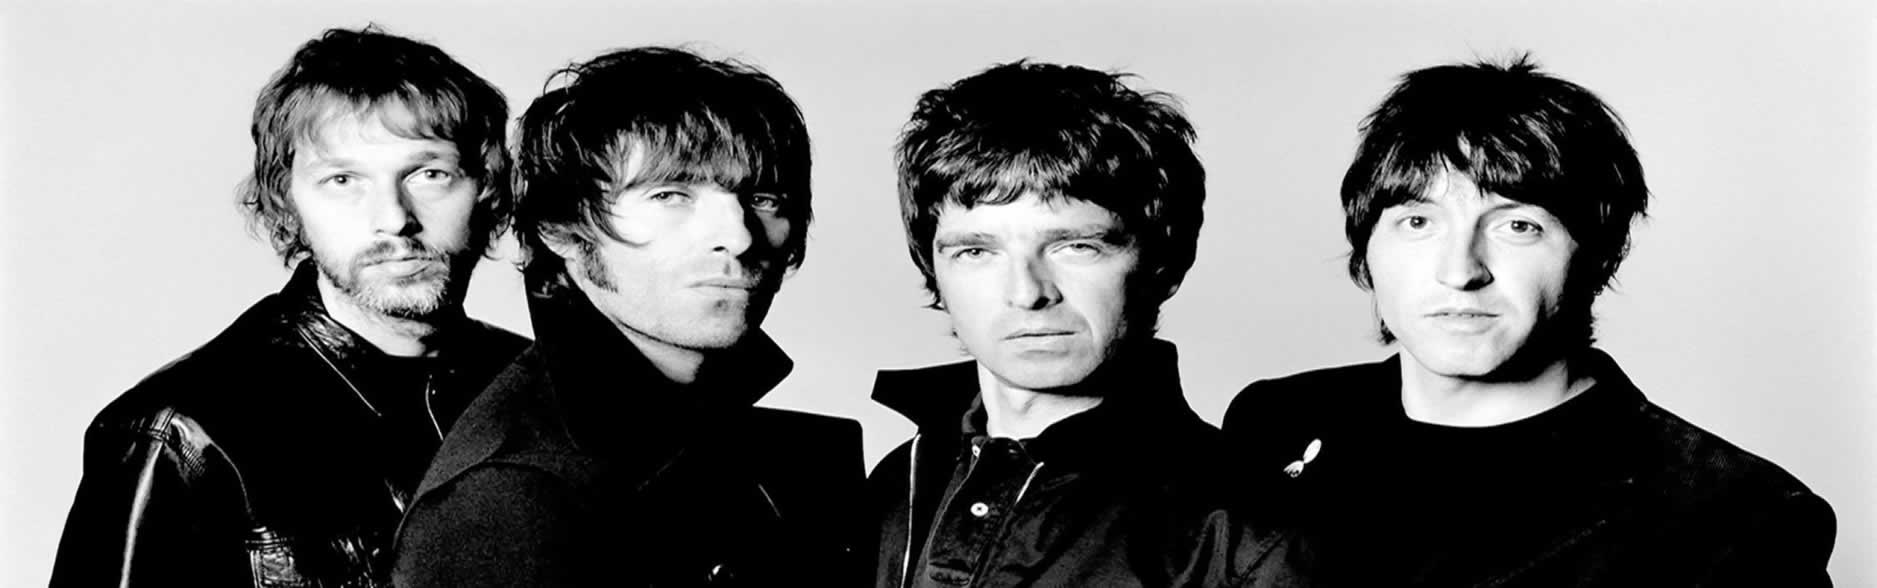 Image of the Oasis band